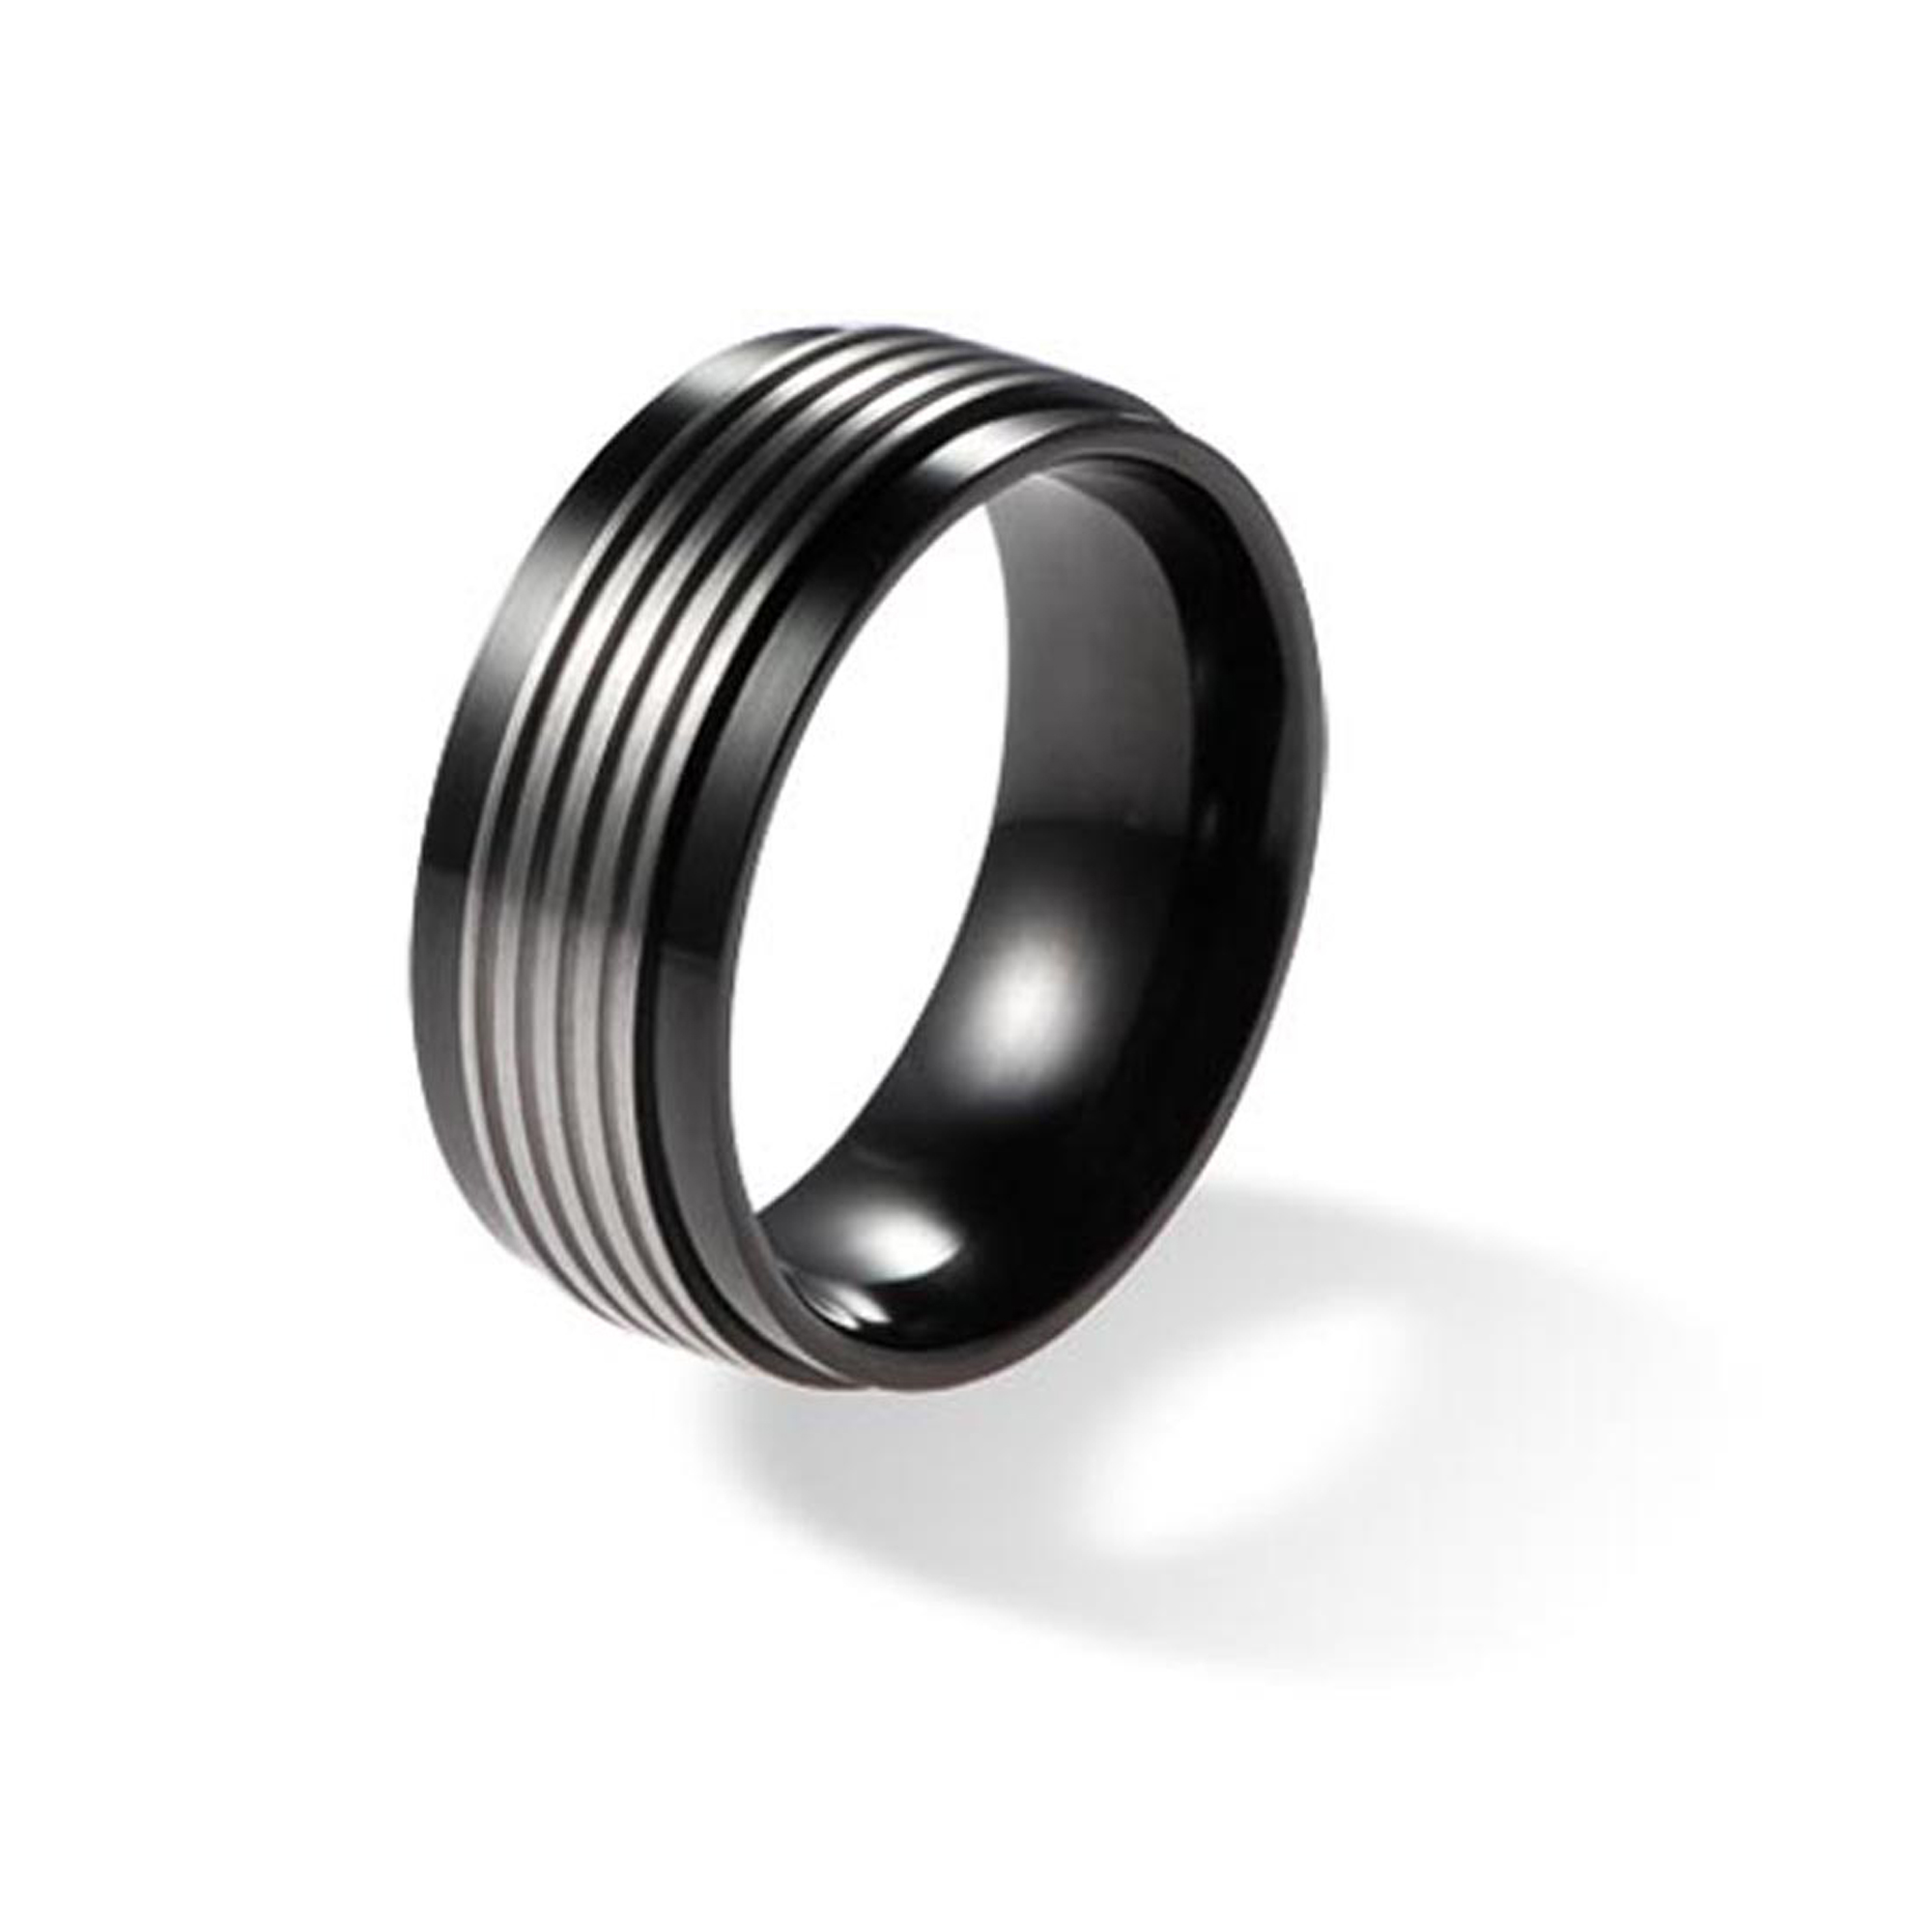 Orien Jewelry 8mm Black Titanium Wedding Band for Men with 4 Polished Thin Grooves Comfort Fit Ring SZ 8-12